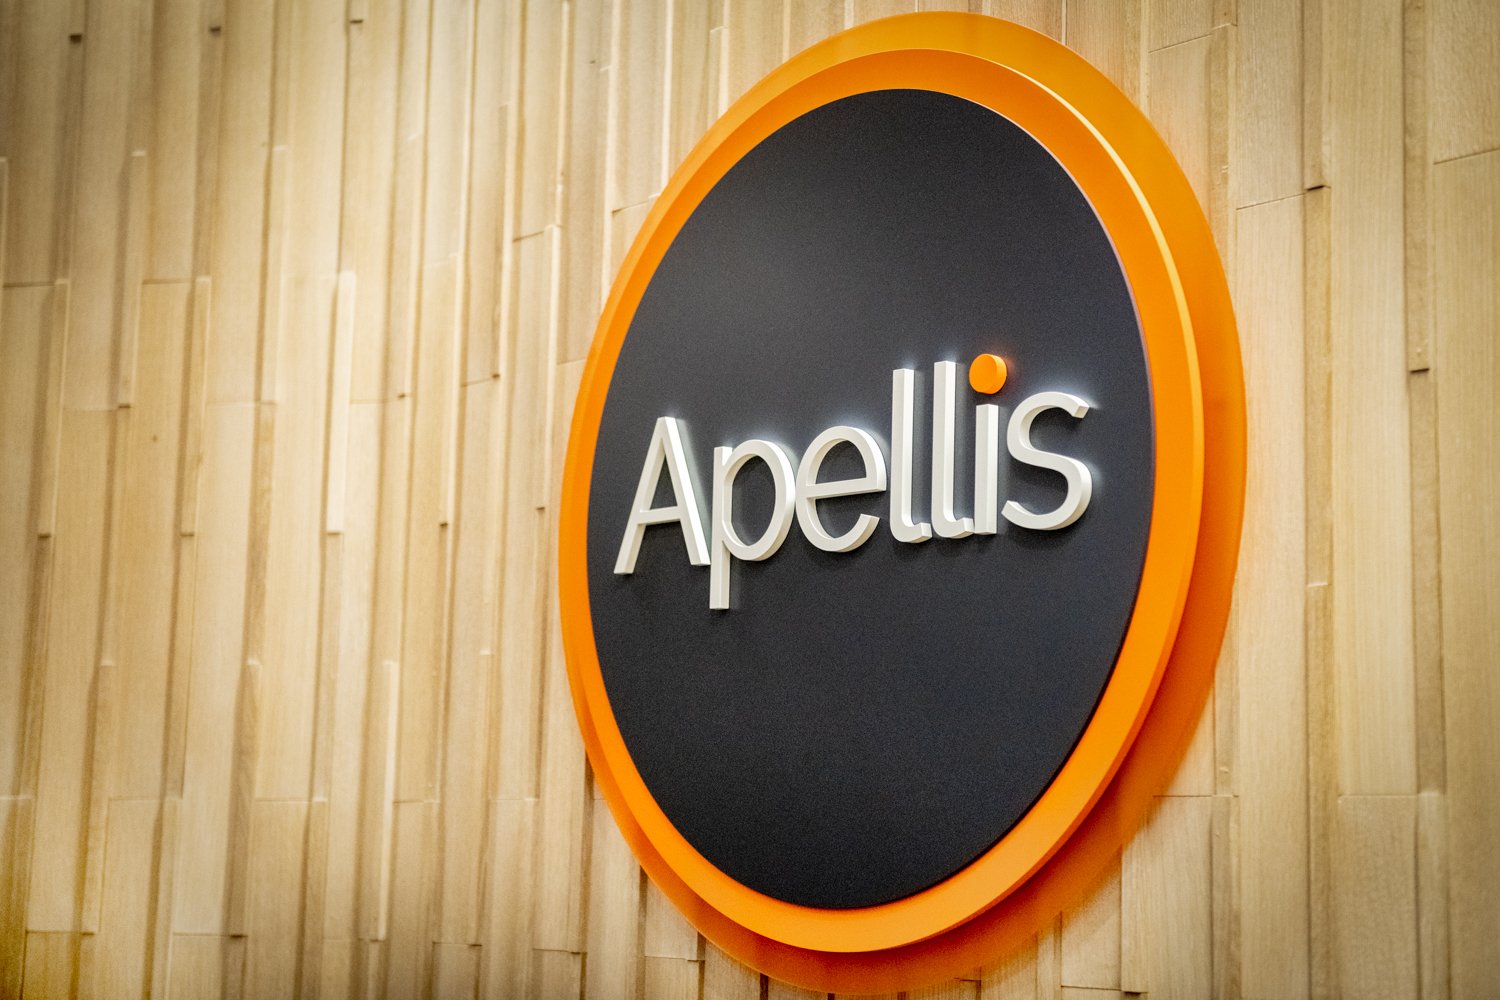 Apellis flags needle problems in hunt for Syfovre side effect source